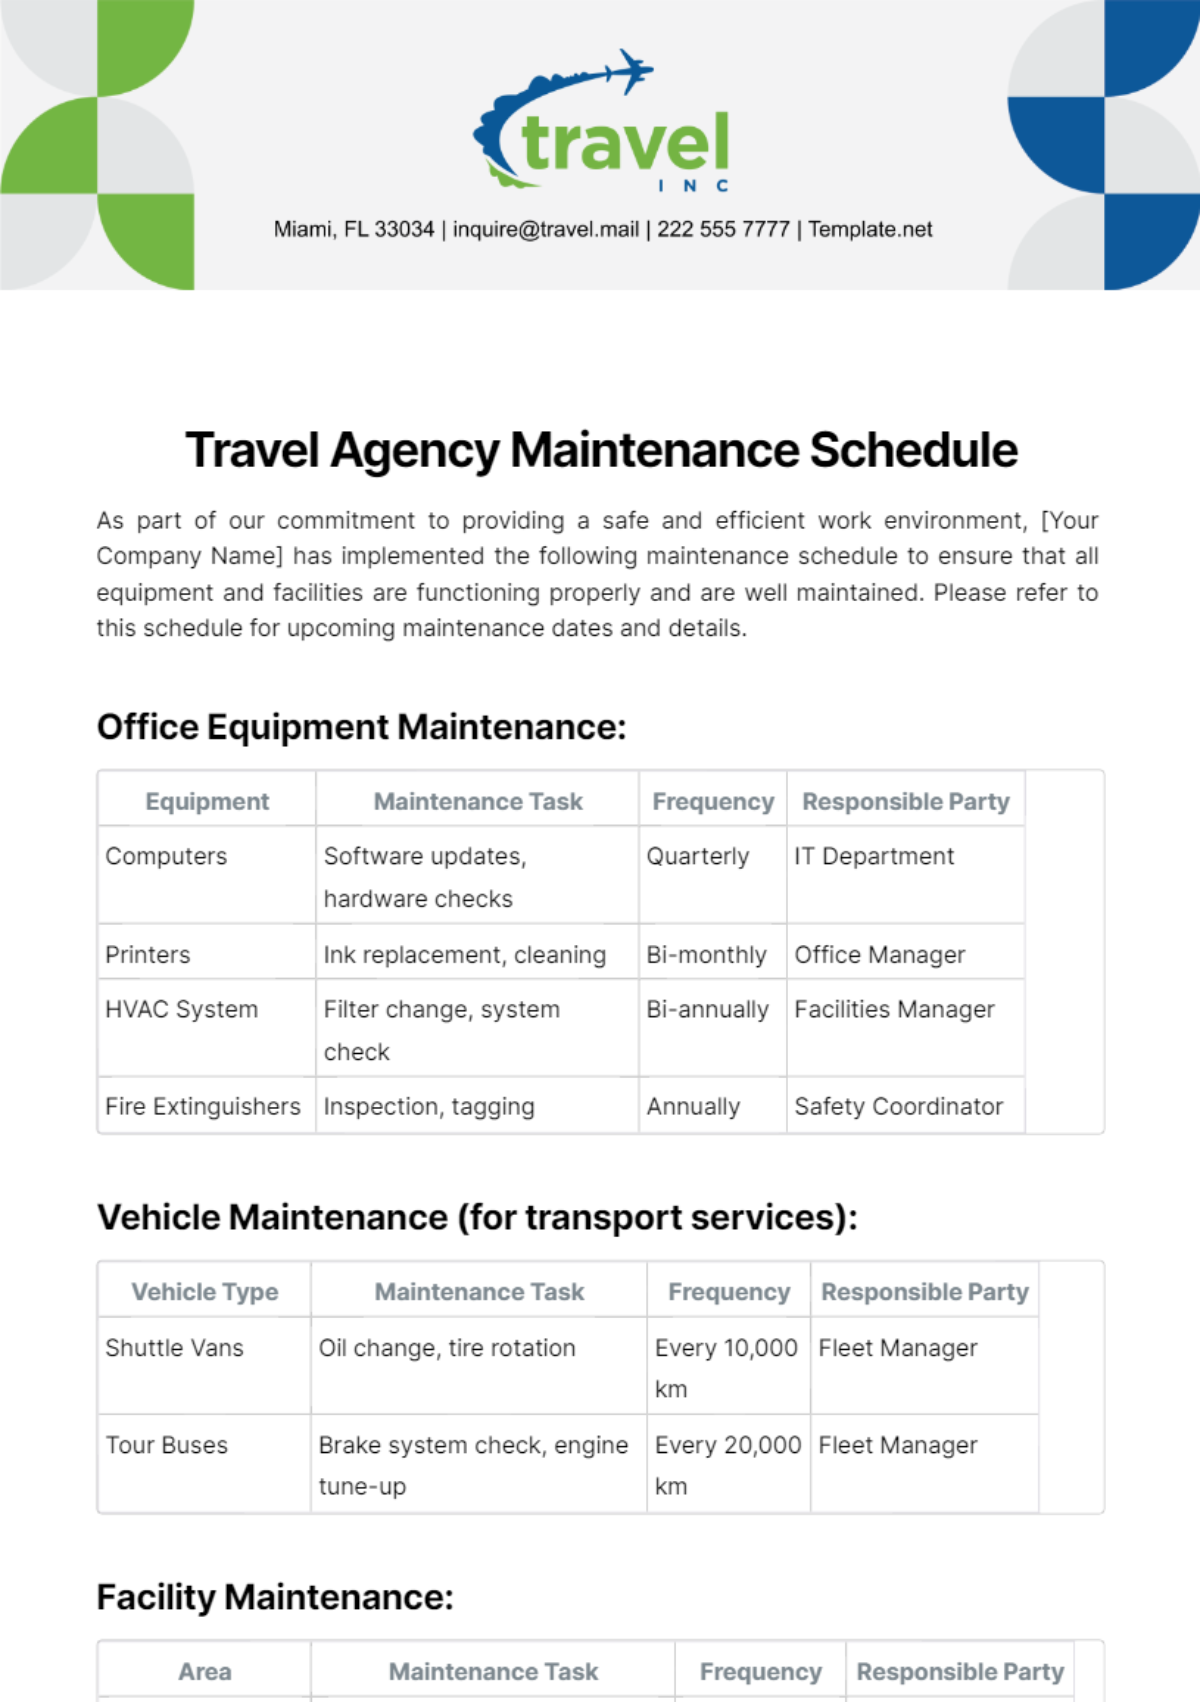 Travel Agency Maintenance Schedule Template